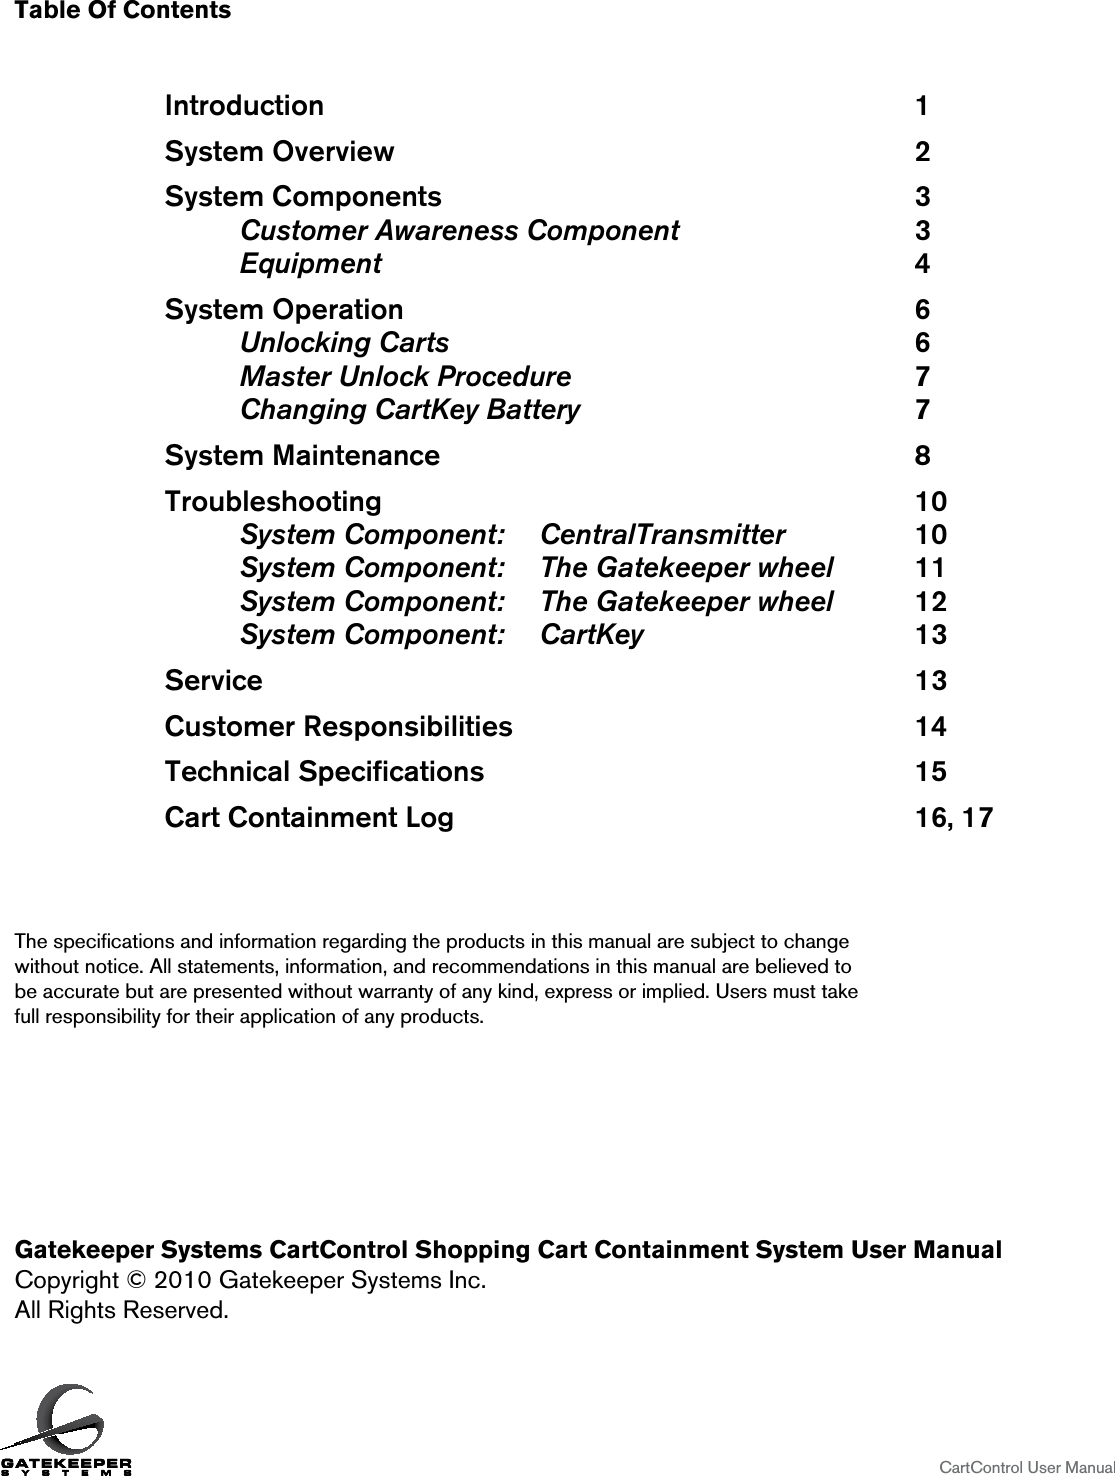 Table Of Contents               Introduction                1    System Overview              2    System Components              3        Customer Awareness Component       3   Equipment        4    System Operation              6       Unlocking Carts       6   Master Unlock Procedure      7   Changing CartKey Battery          7    System Maintenance              8    Troubleshooting               10   System Component:  CentralTransmitter    10   System Component:  The Gatekeeper wheel   11   System Component:  The Gatekeeper wheel   12   System Component:  CartKey        13    Service                  13    Customer Responsibilities            14    Technical Speciﬁcations            15    Cart Containment Log             16, 17The speciﬁcations and information regarding the products in this manual are subject to change  without notice. All statements, information, and recommendations in this manual are believed to  be accurate but are presented without warranty of any kind, express or implied. Users must take  full responsibility for their application of any products.Gatekeeper Systems CartControl Shopping Cart Containment System User ManualCopyright © 2010 Gatekeeper Systems Inc.All Rights Reserved.                    CartControl User Manual